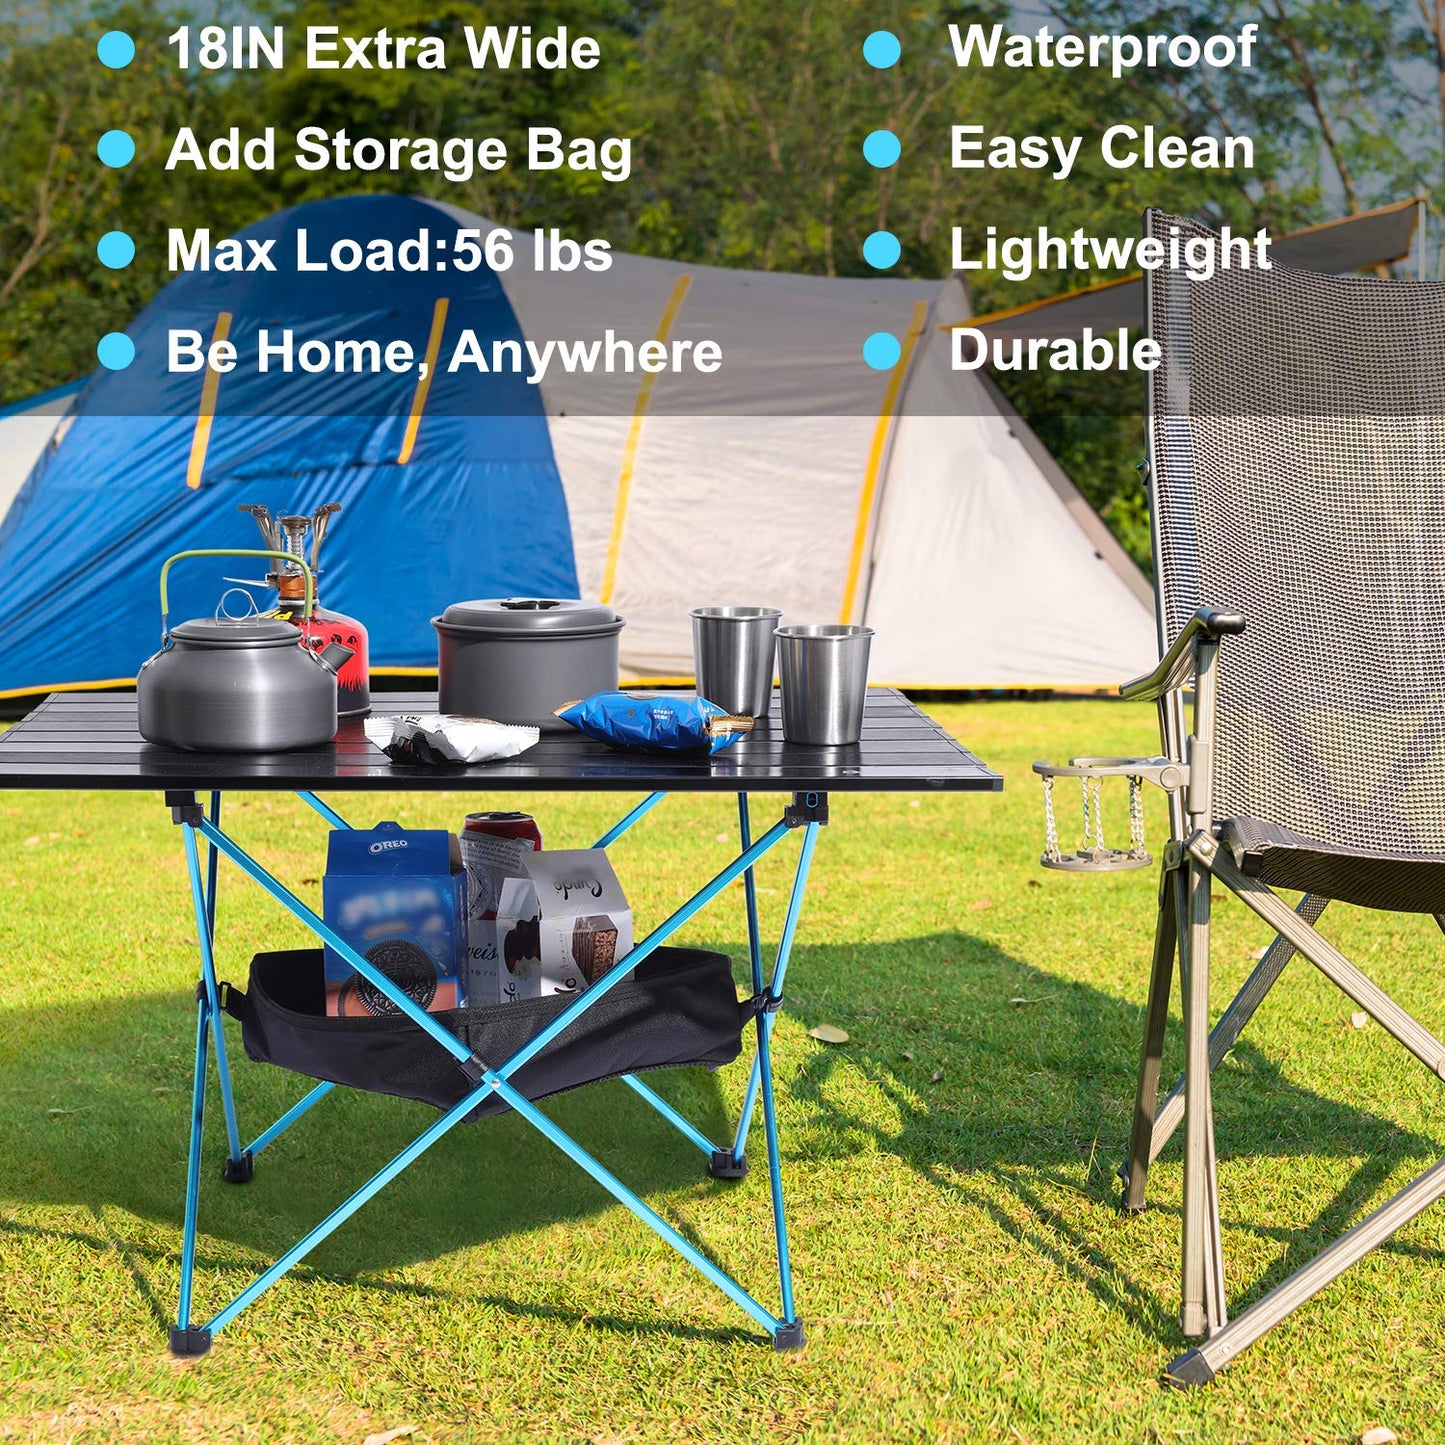 G4Free Camping Table Folding Portable